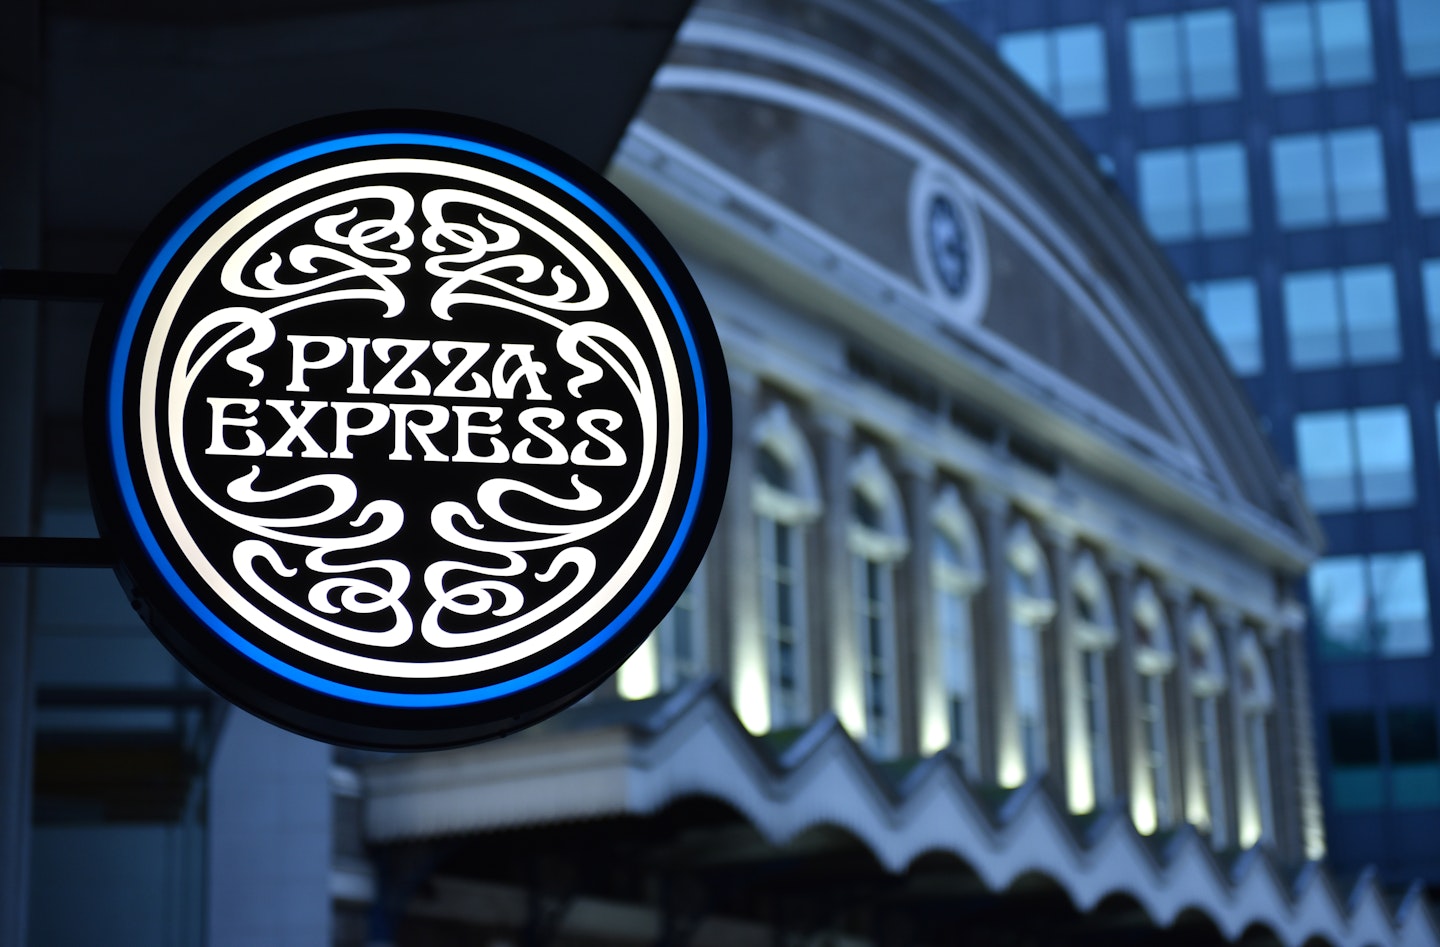 A Love Letter To Pizza Express As It Looks Like It's Going Into Administration